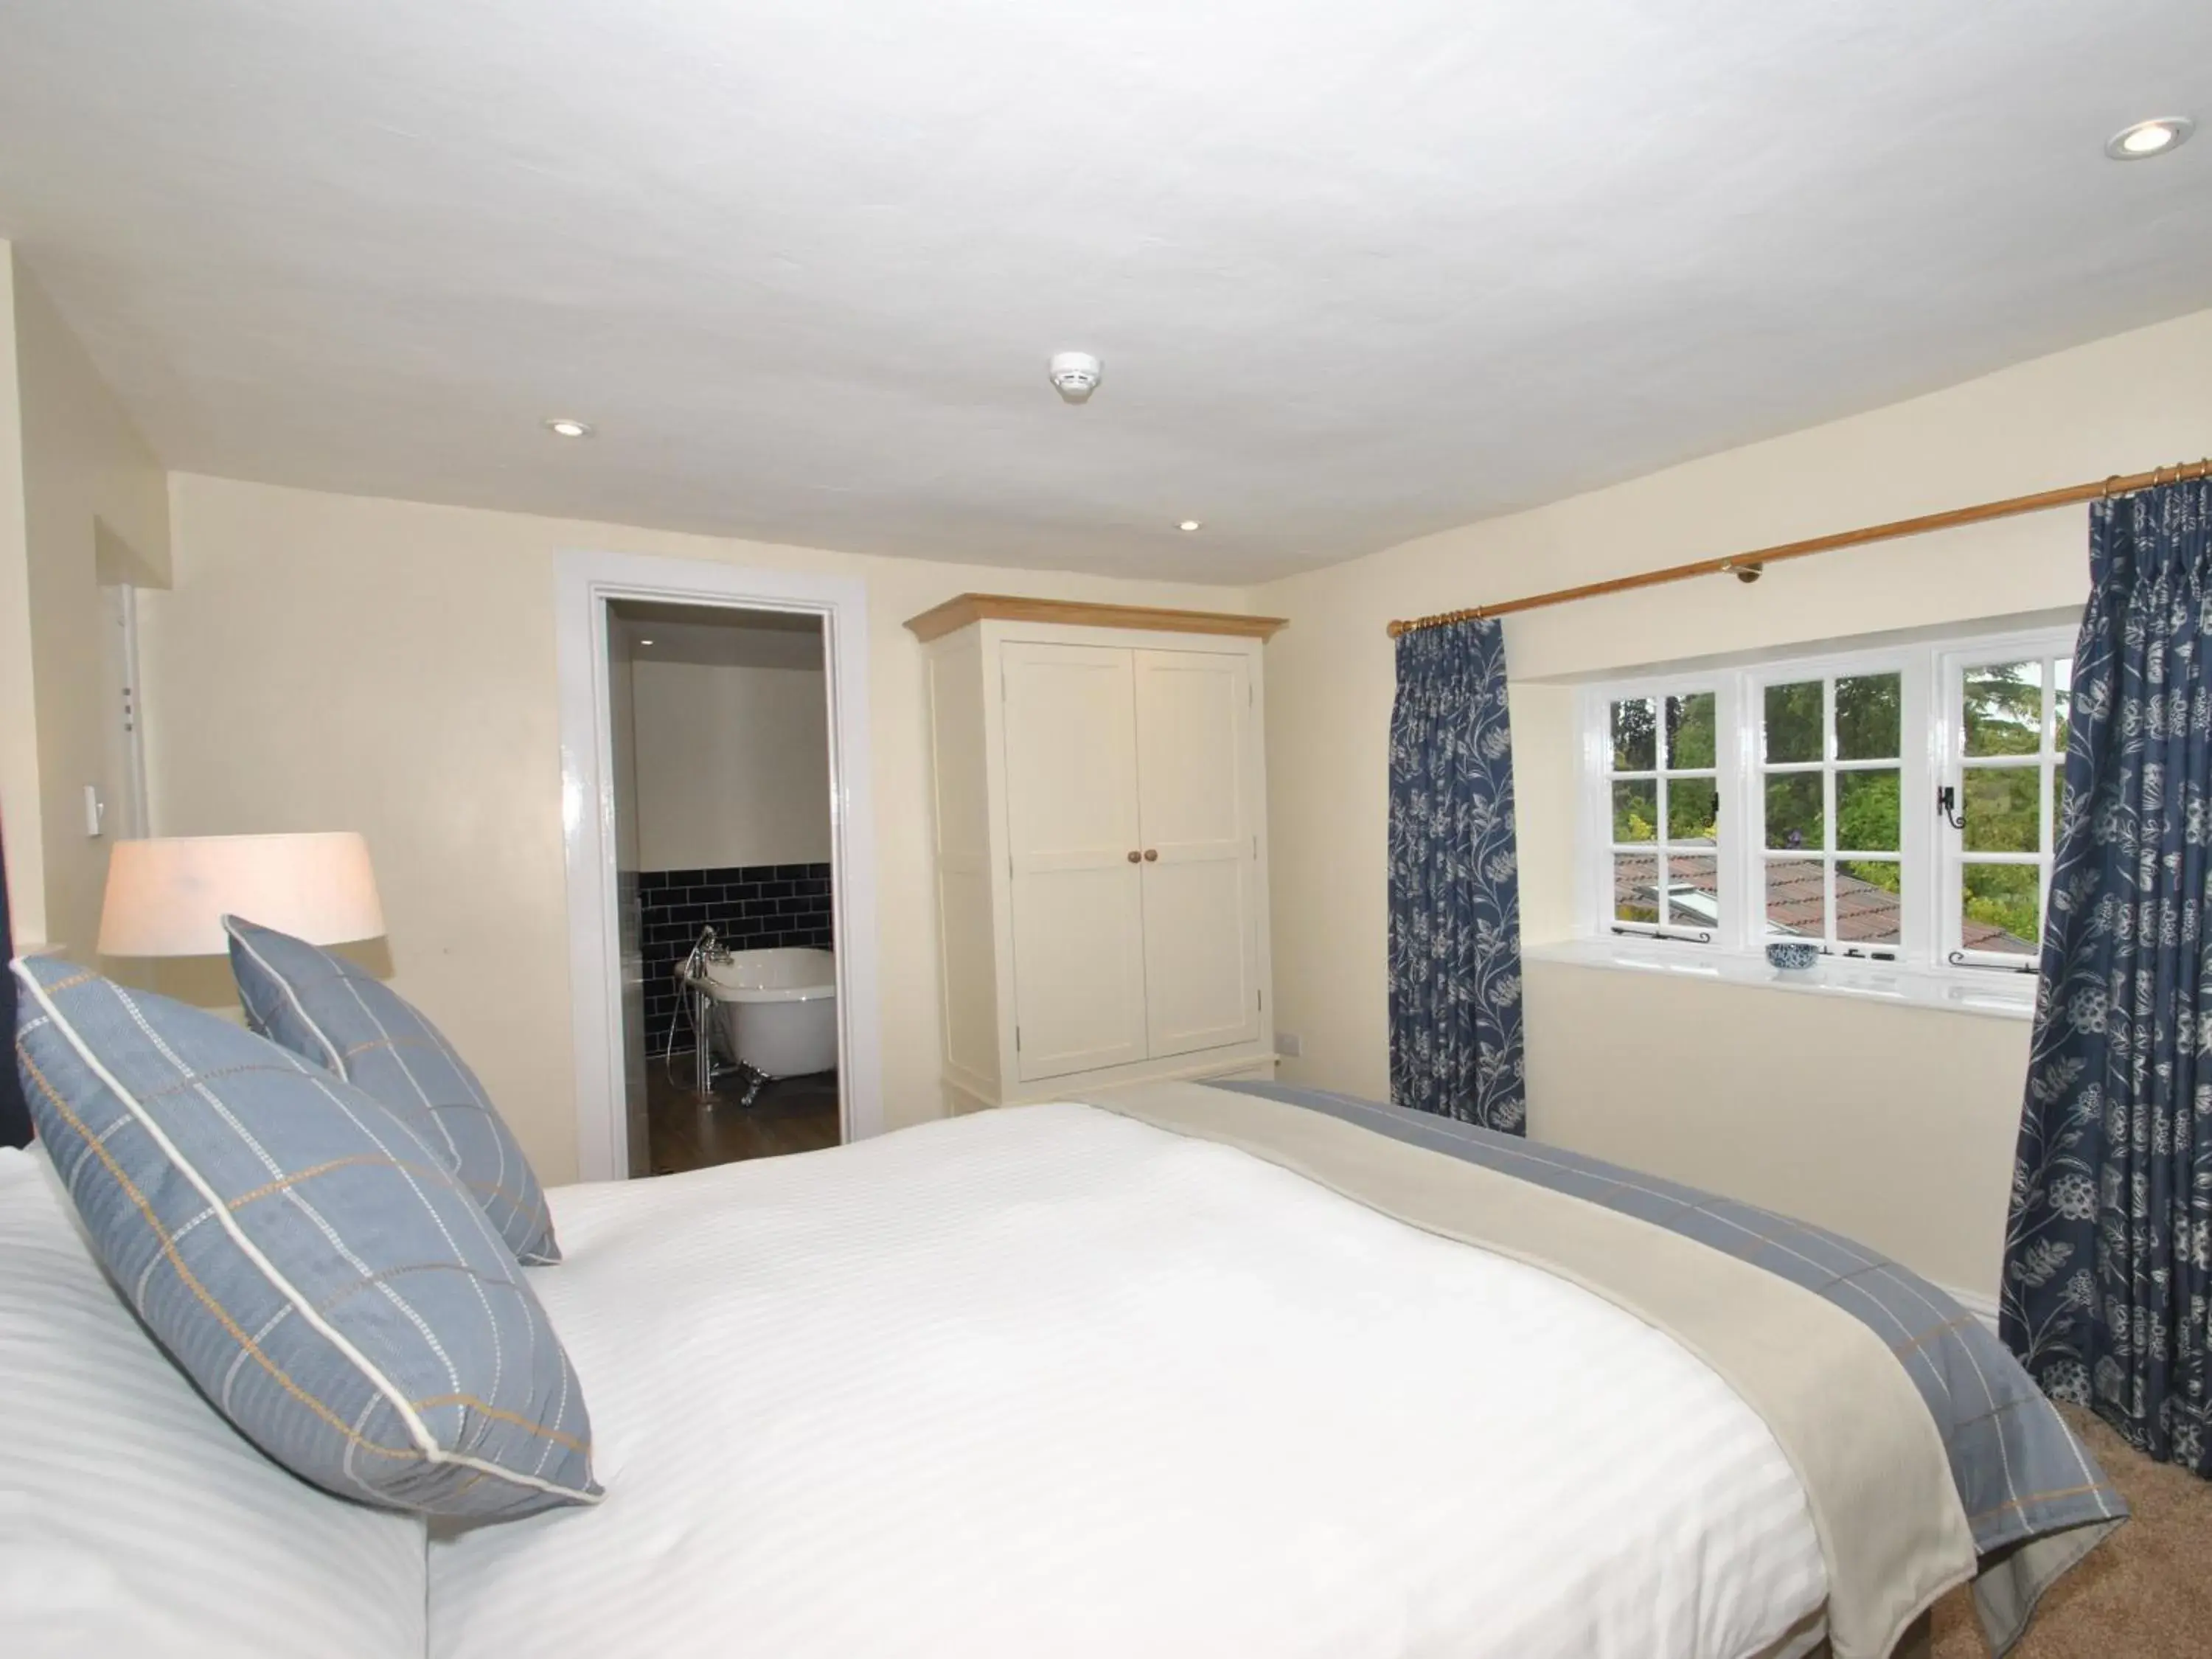 Superior Double Room - single occupancy in The Hood Arms